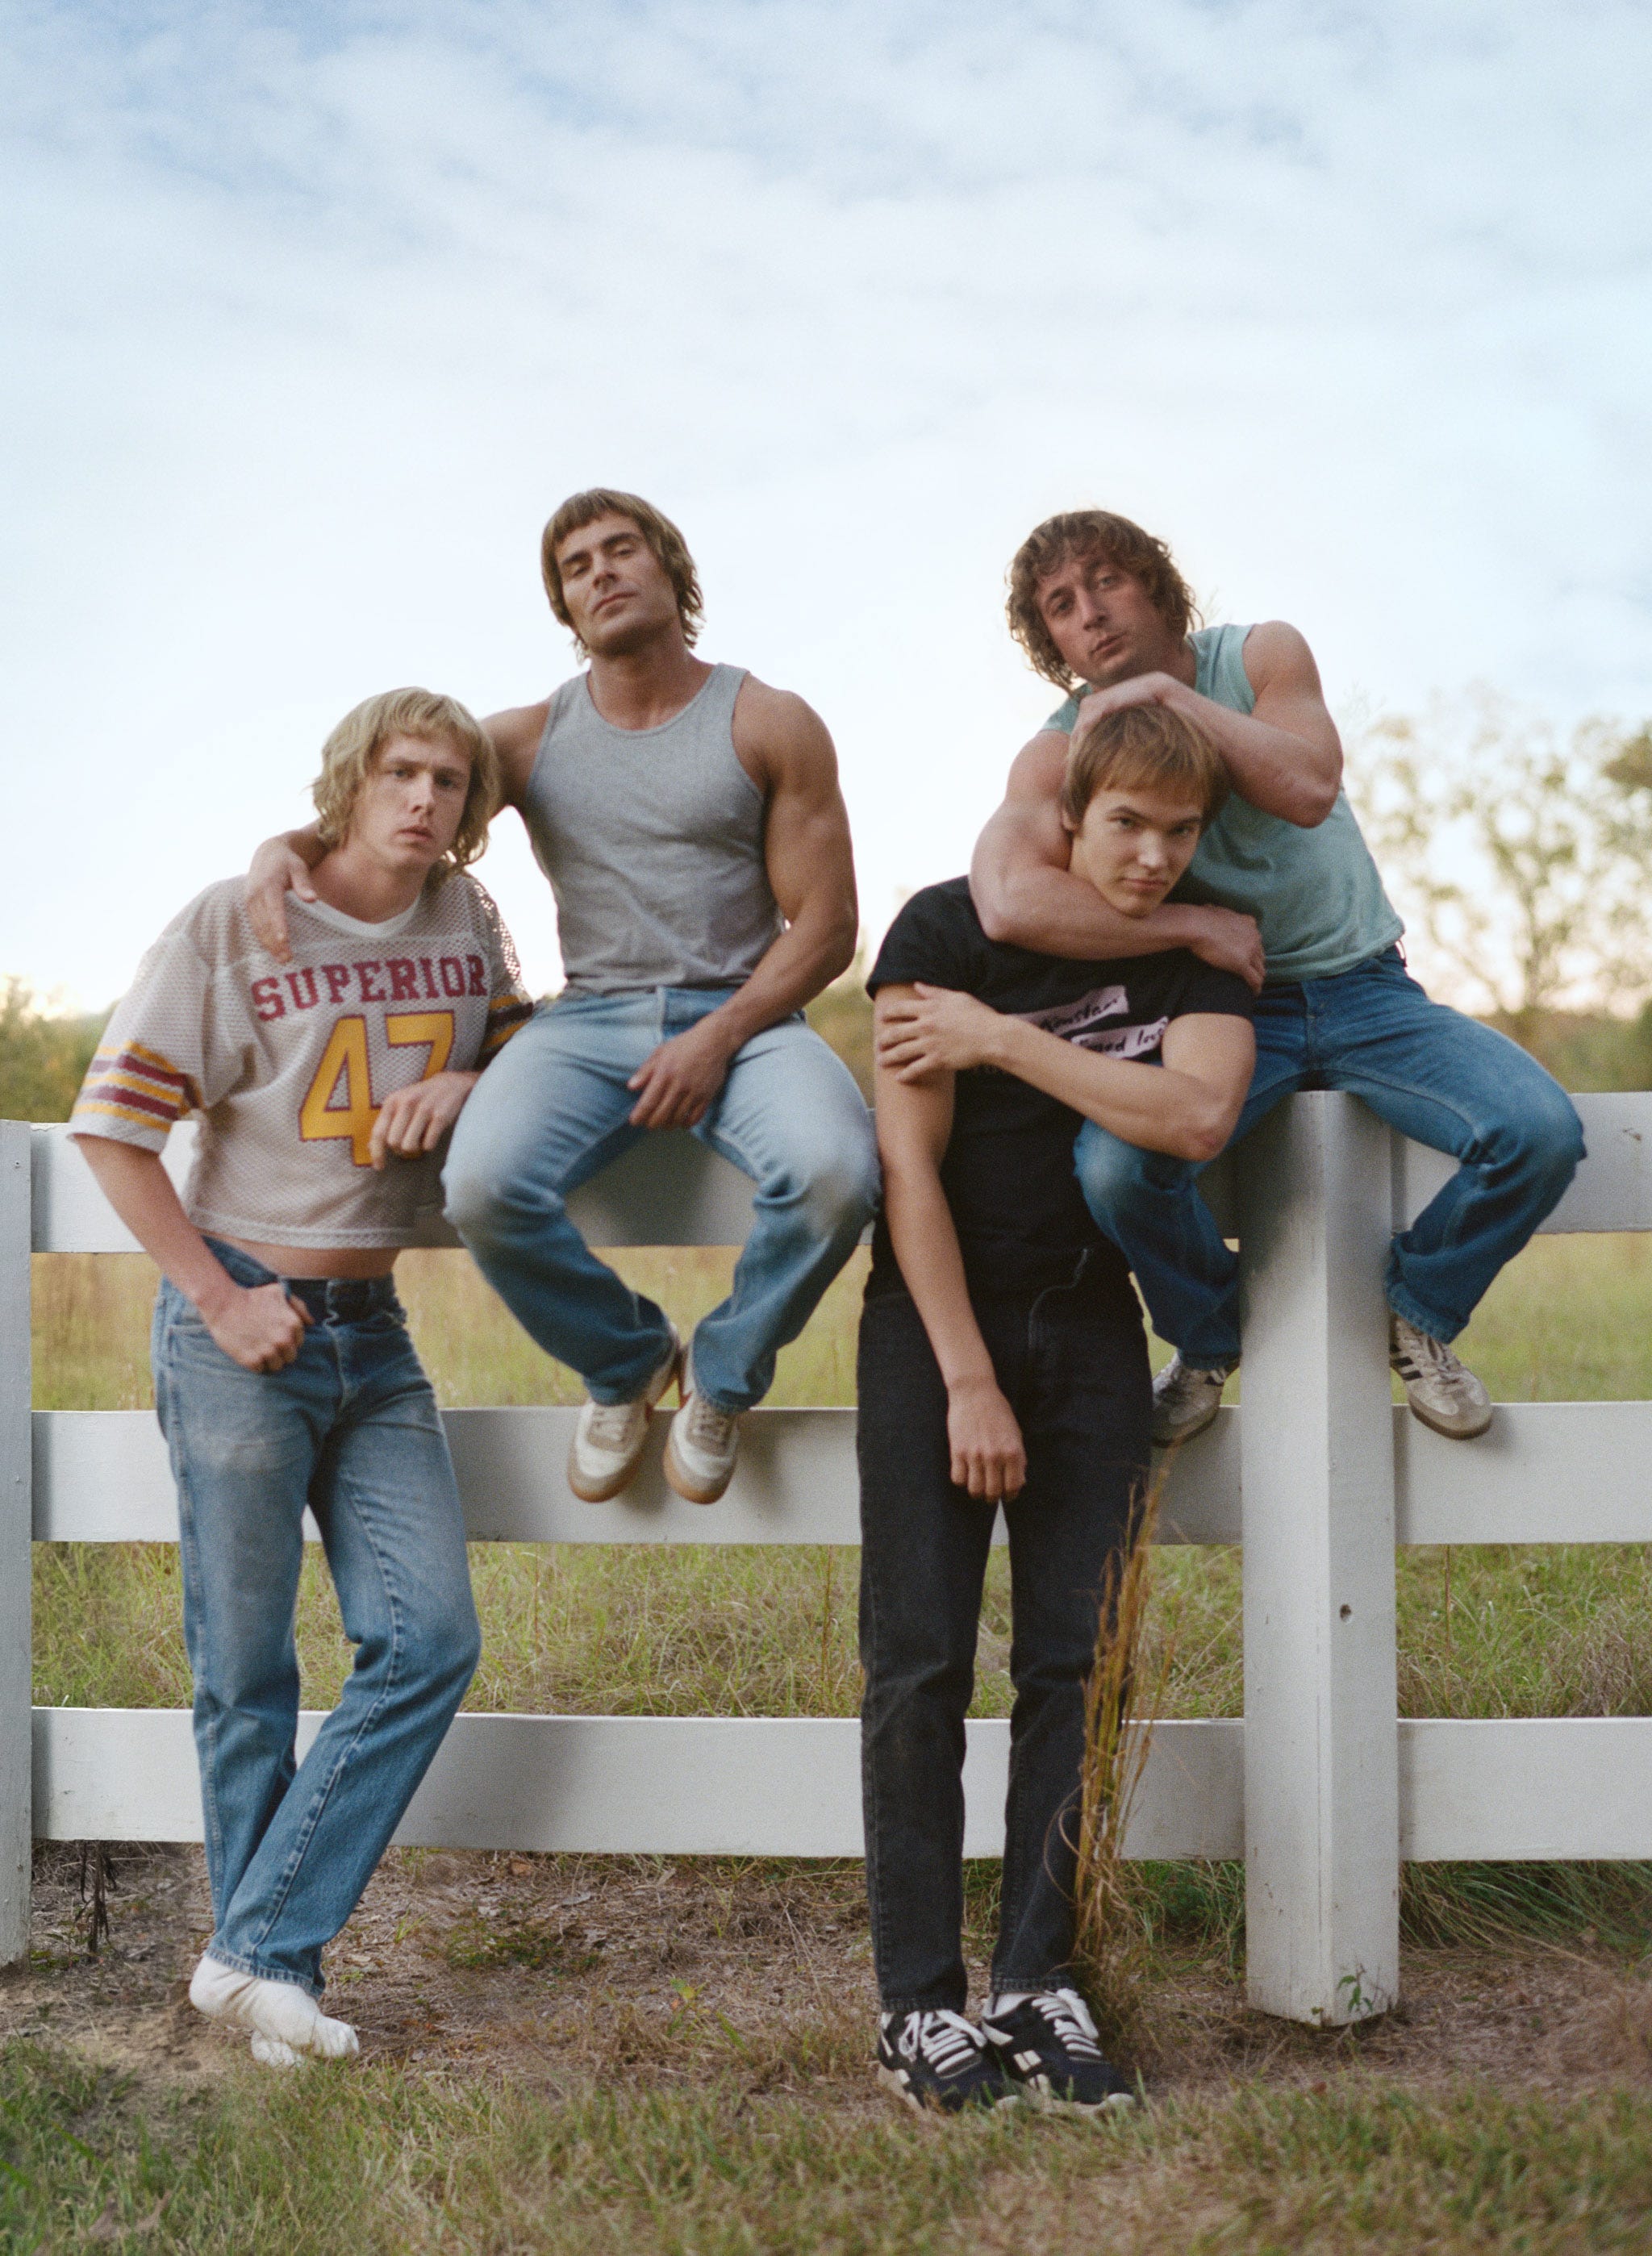 'The Iron Claw' Is Based on the Devastating True Story of the Von Erich Brothers